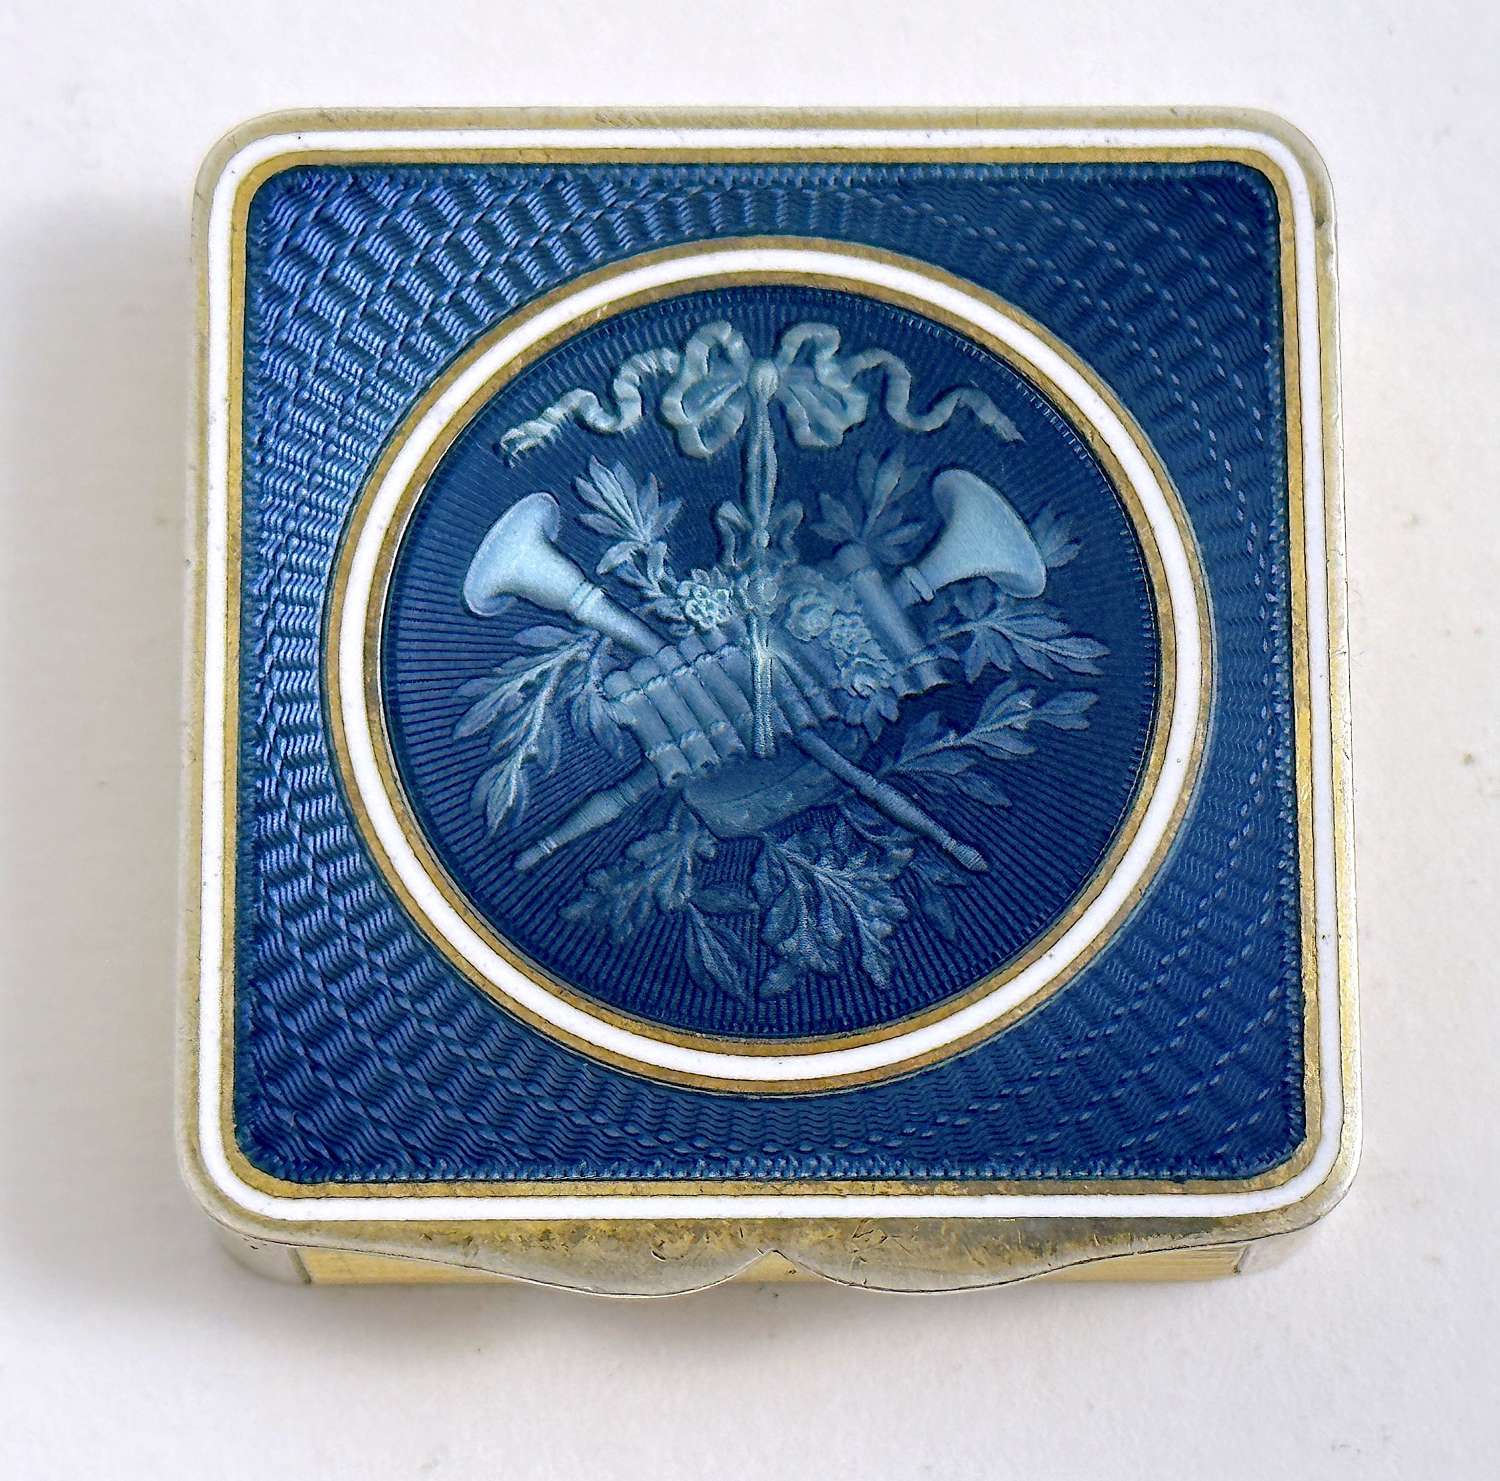 Beautiful Antique French Silver and Blue Guilloche Enamel Box.